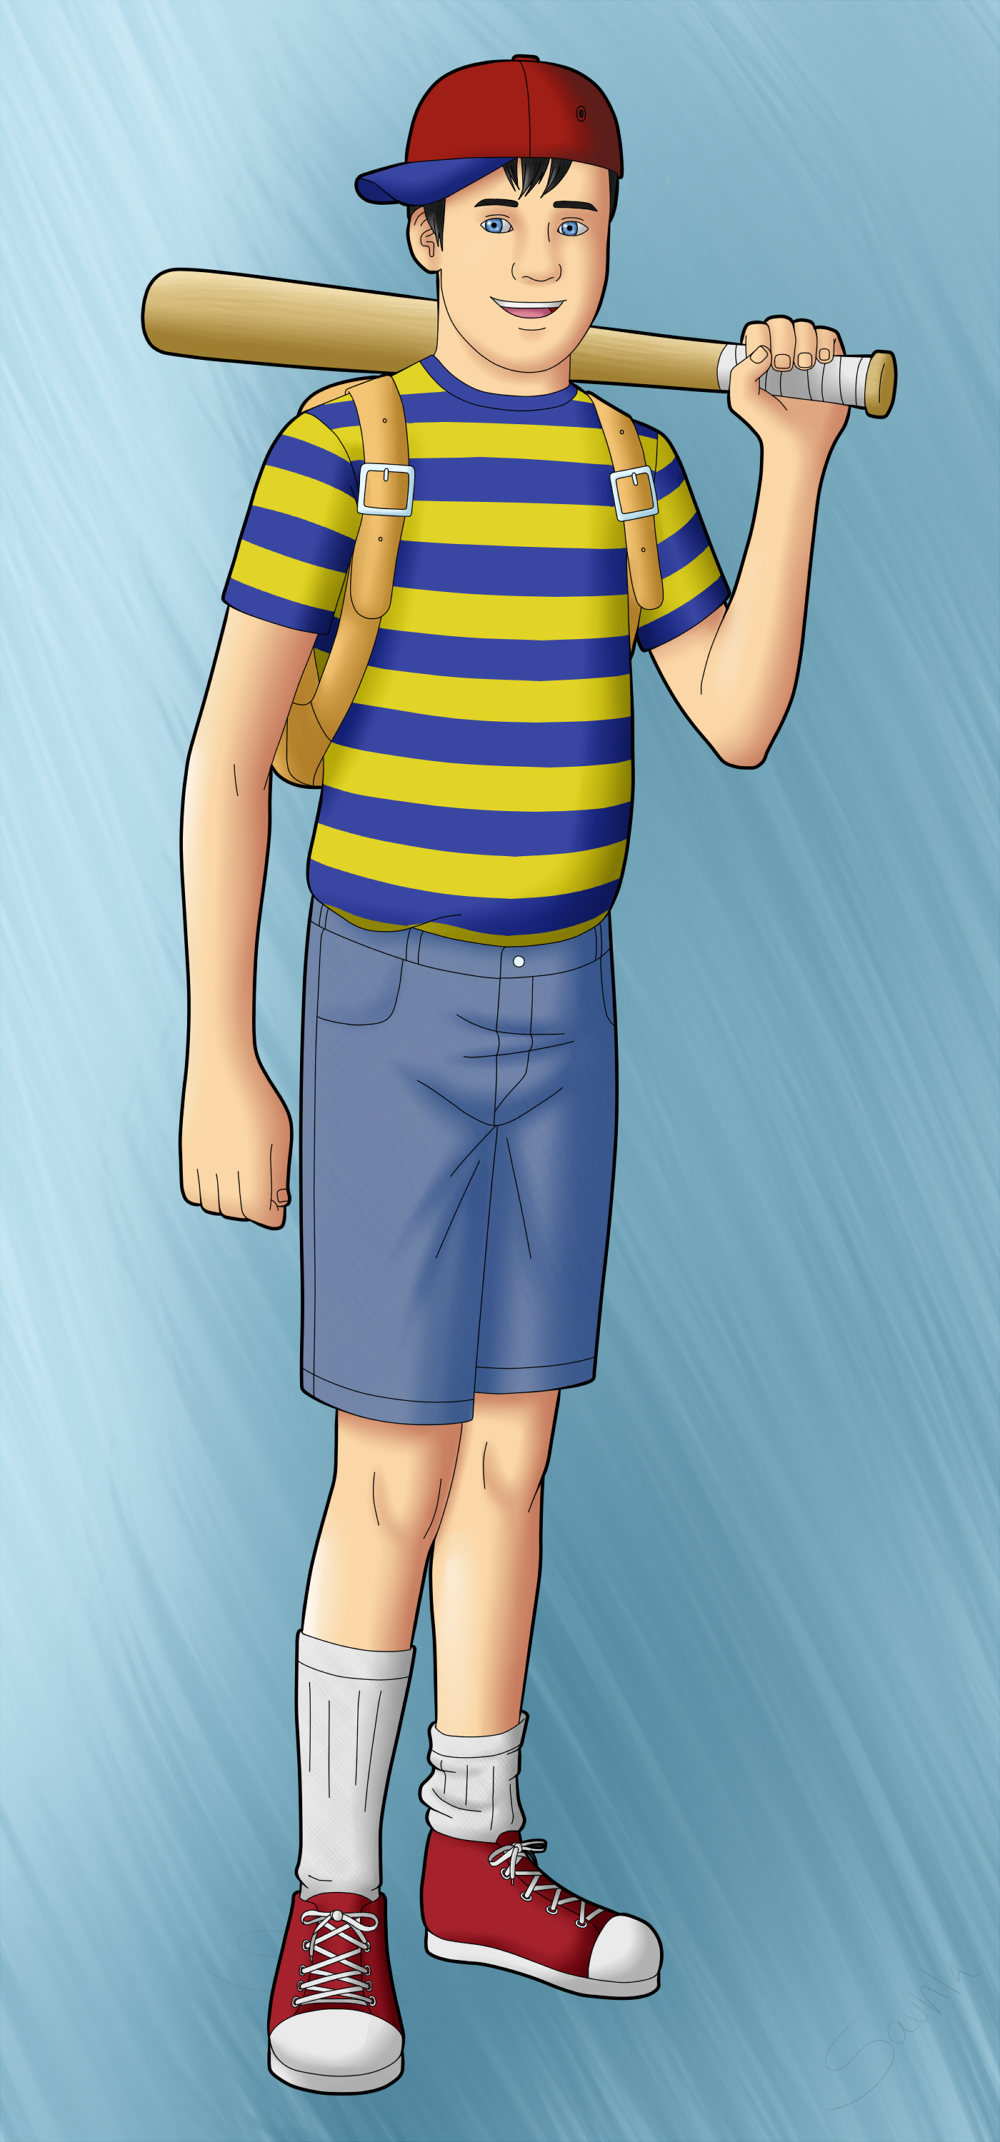 Earthbound: Ness by Katalyvos